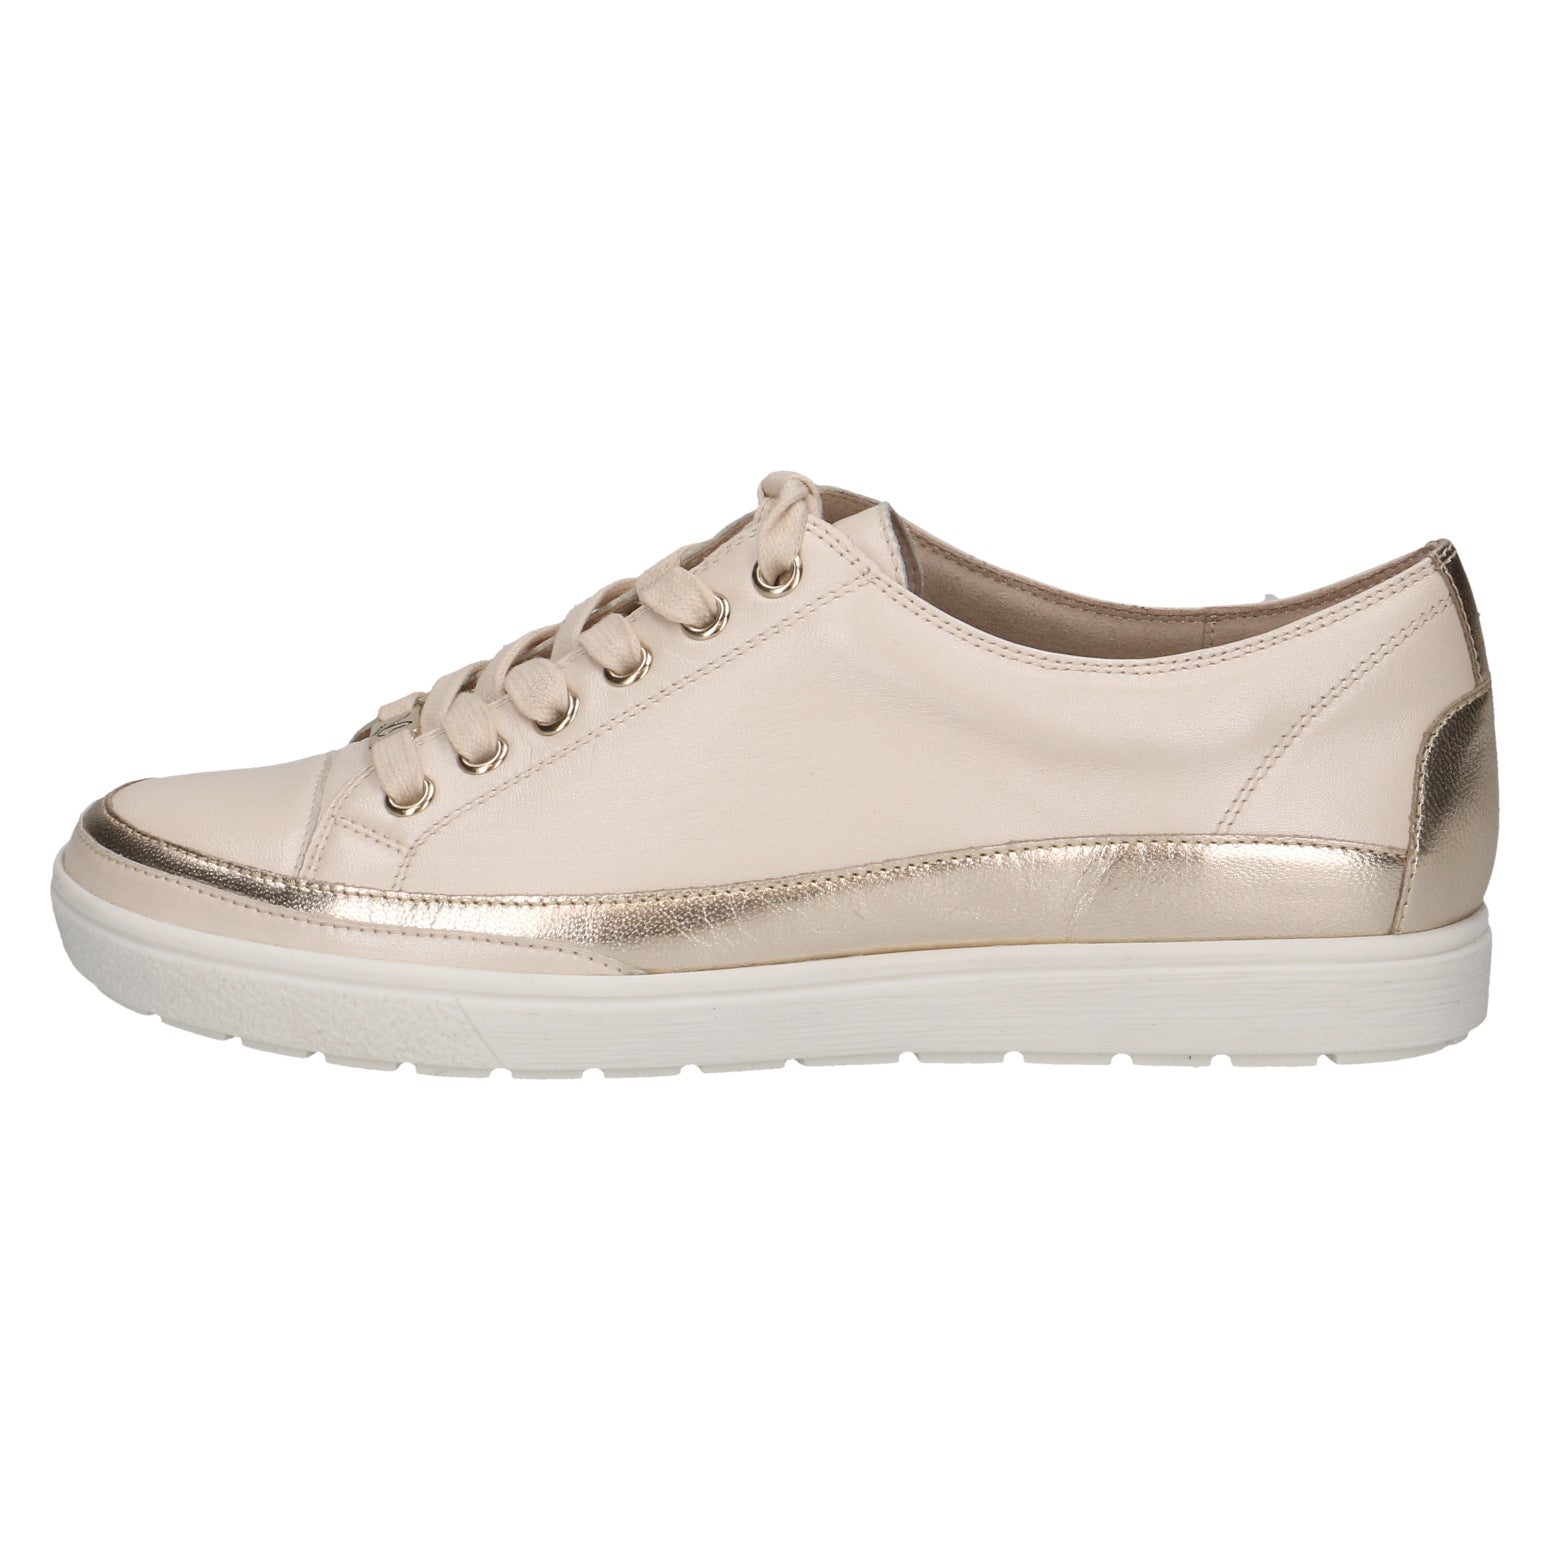 Caprice 9-23654-42 450 Ladies Cream Leather Lace Up Shoes